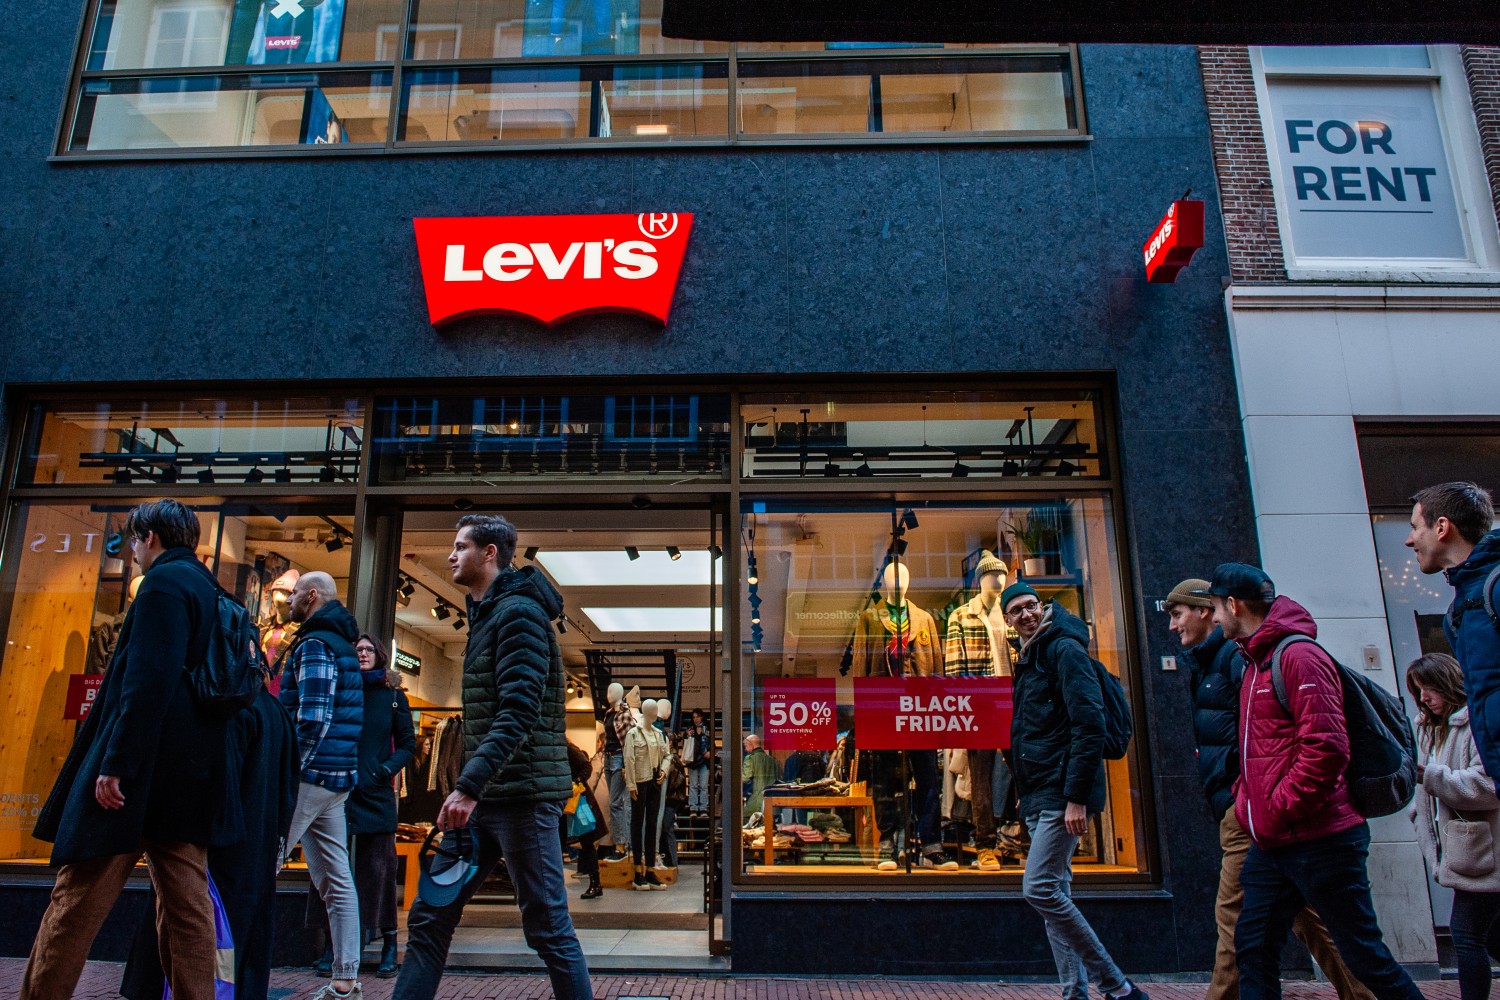 Like It or Not, AI Models Are Coming to Levi's - InsideHook